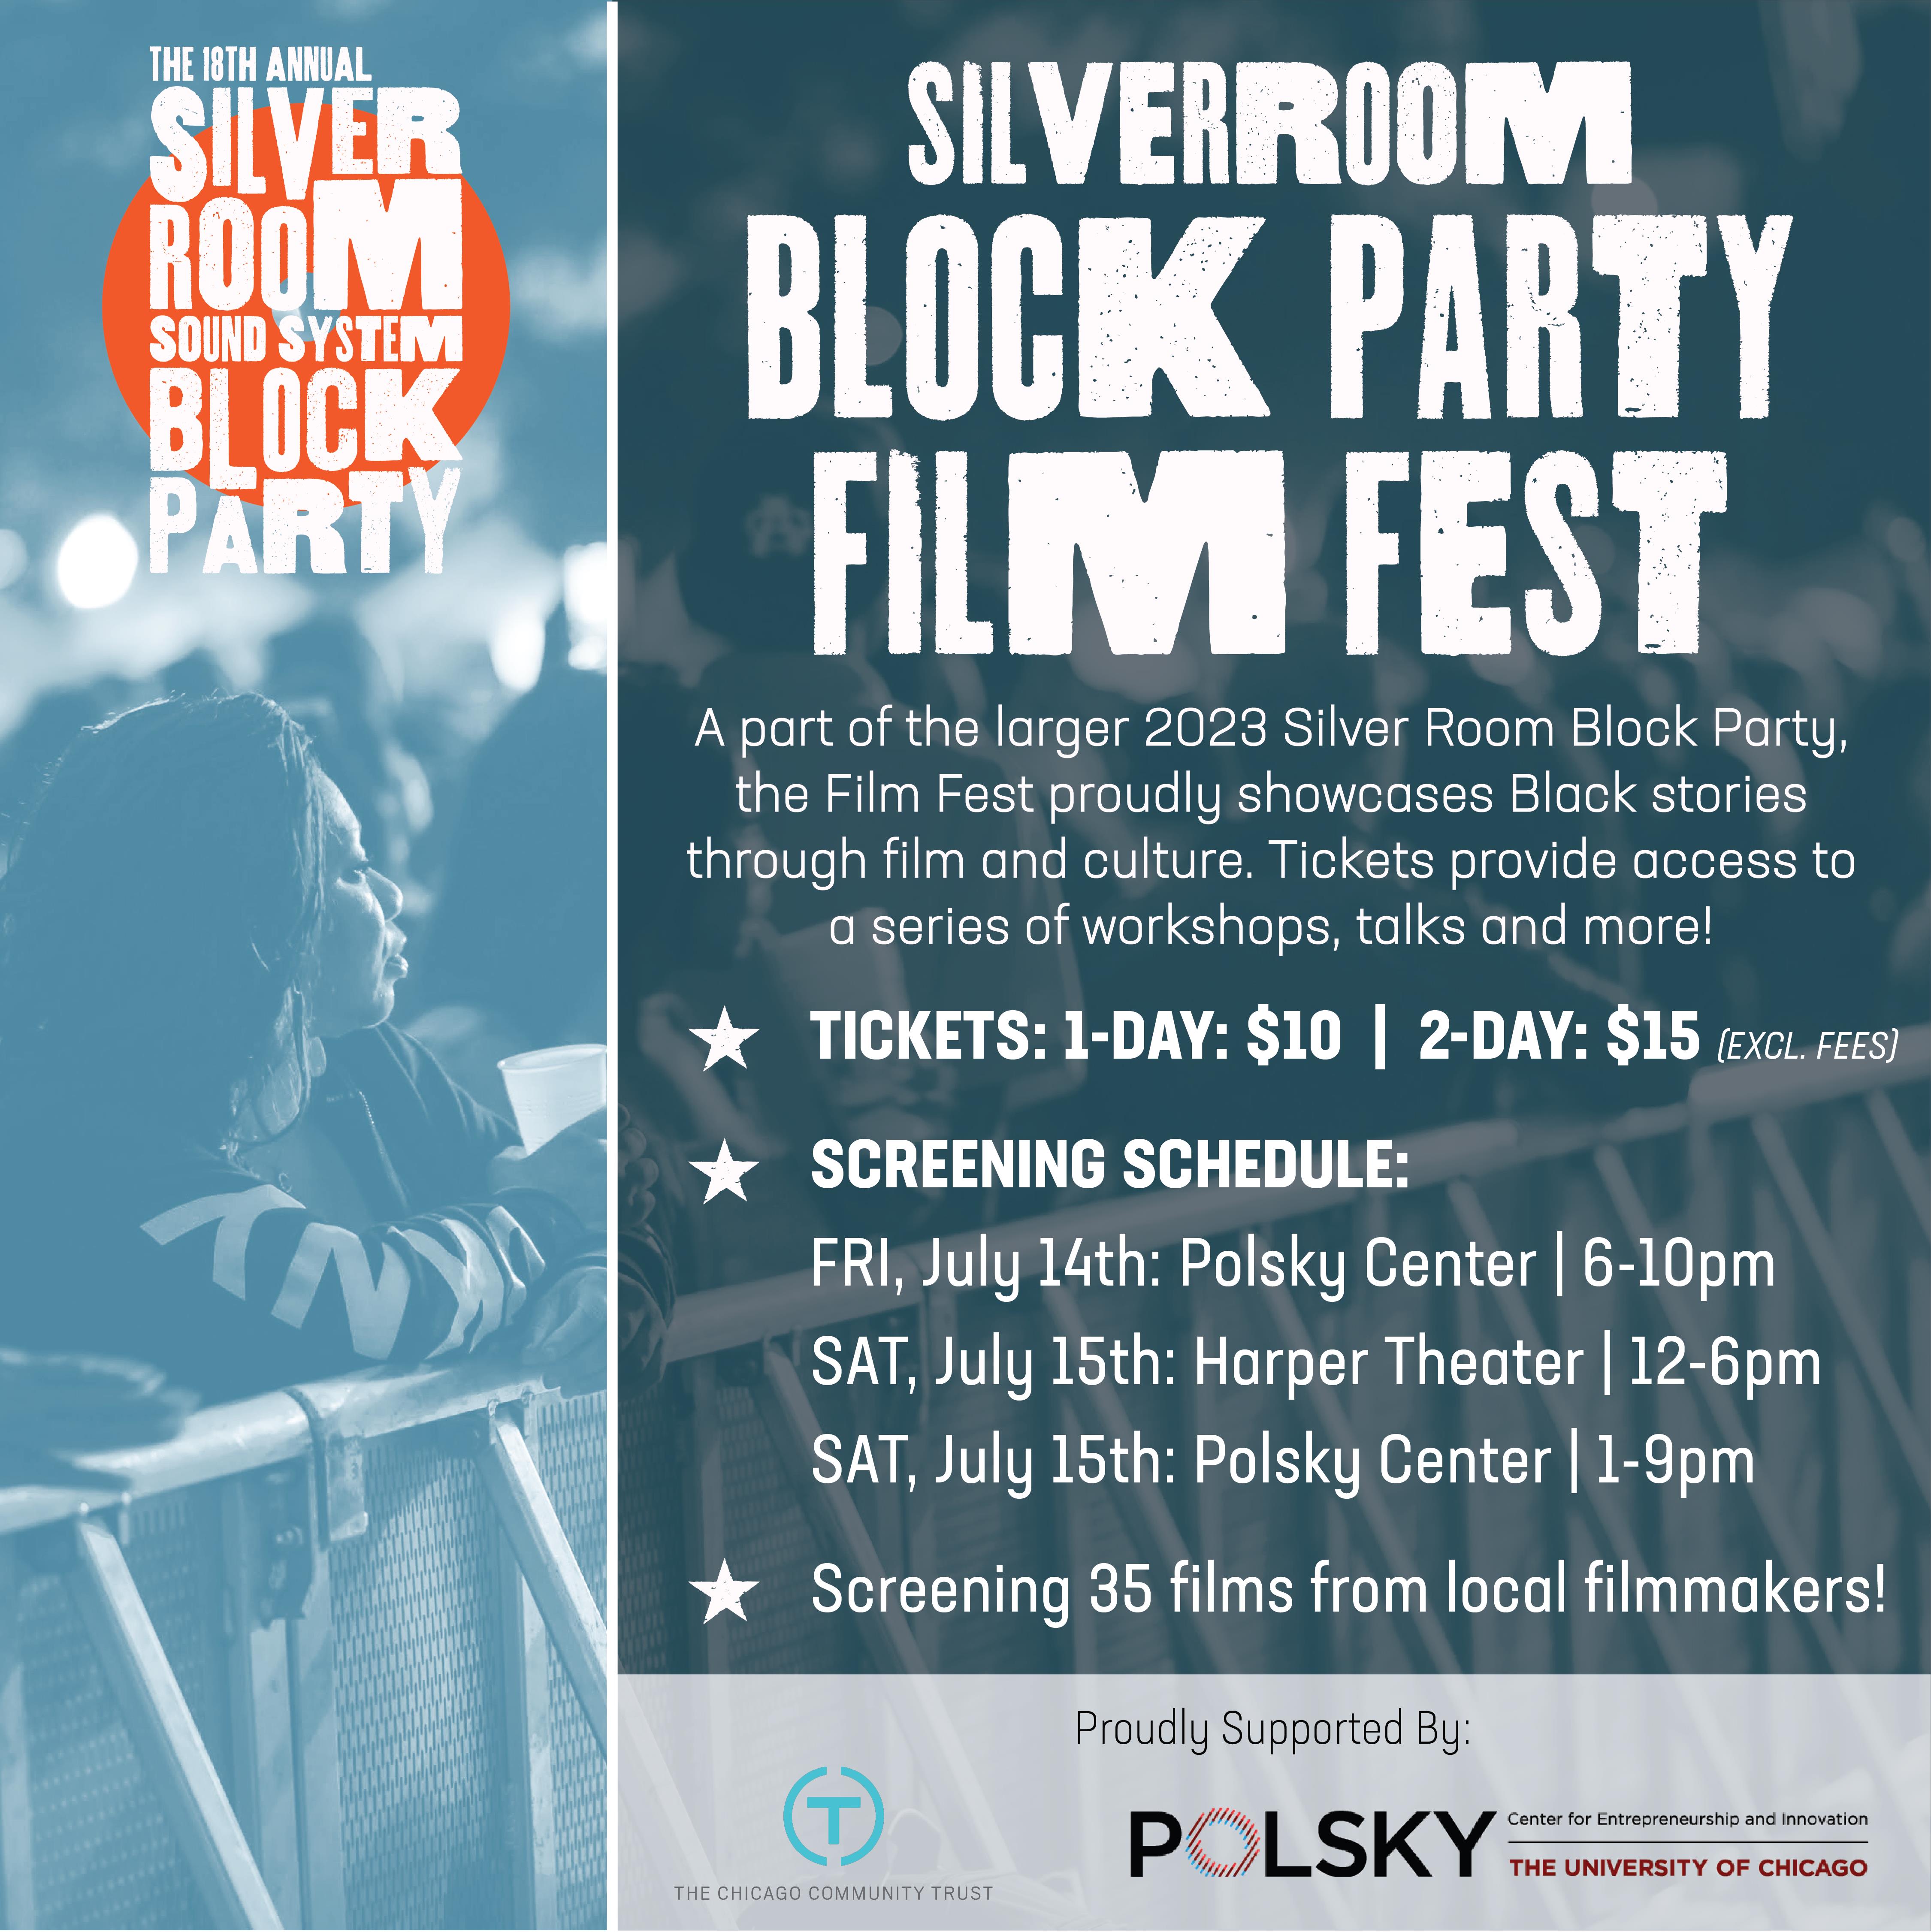 Buy Tickets to The Silver Room Block Party Film Fest in Chicago on Jul